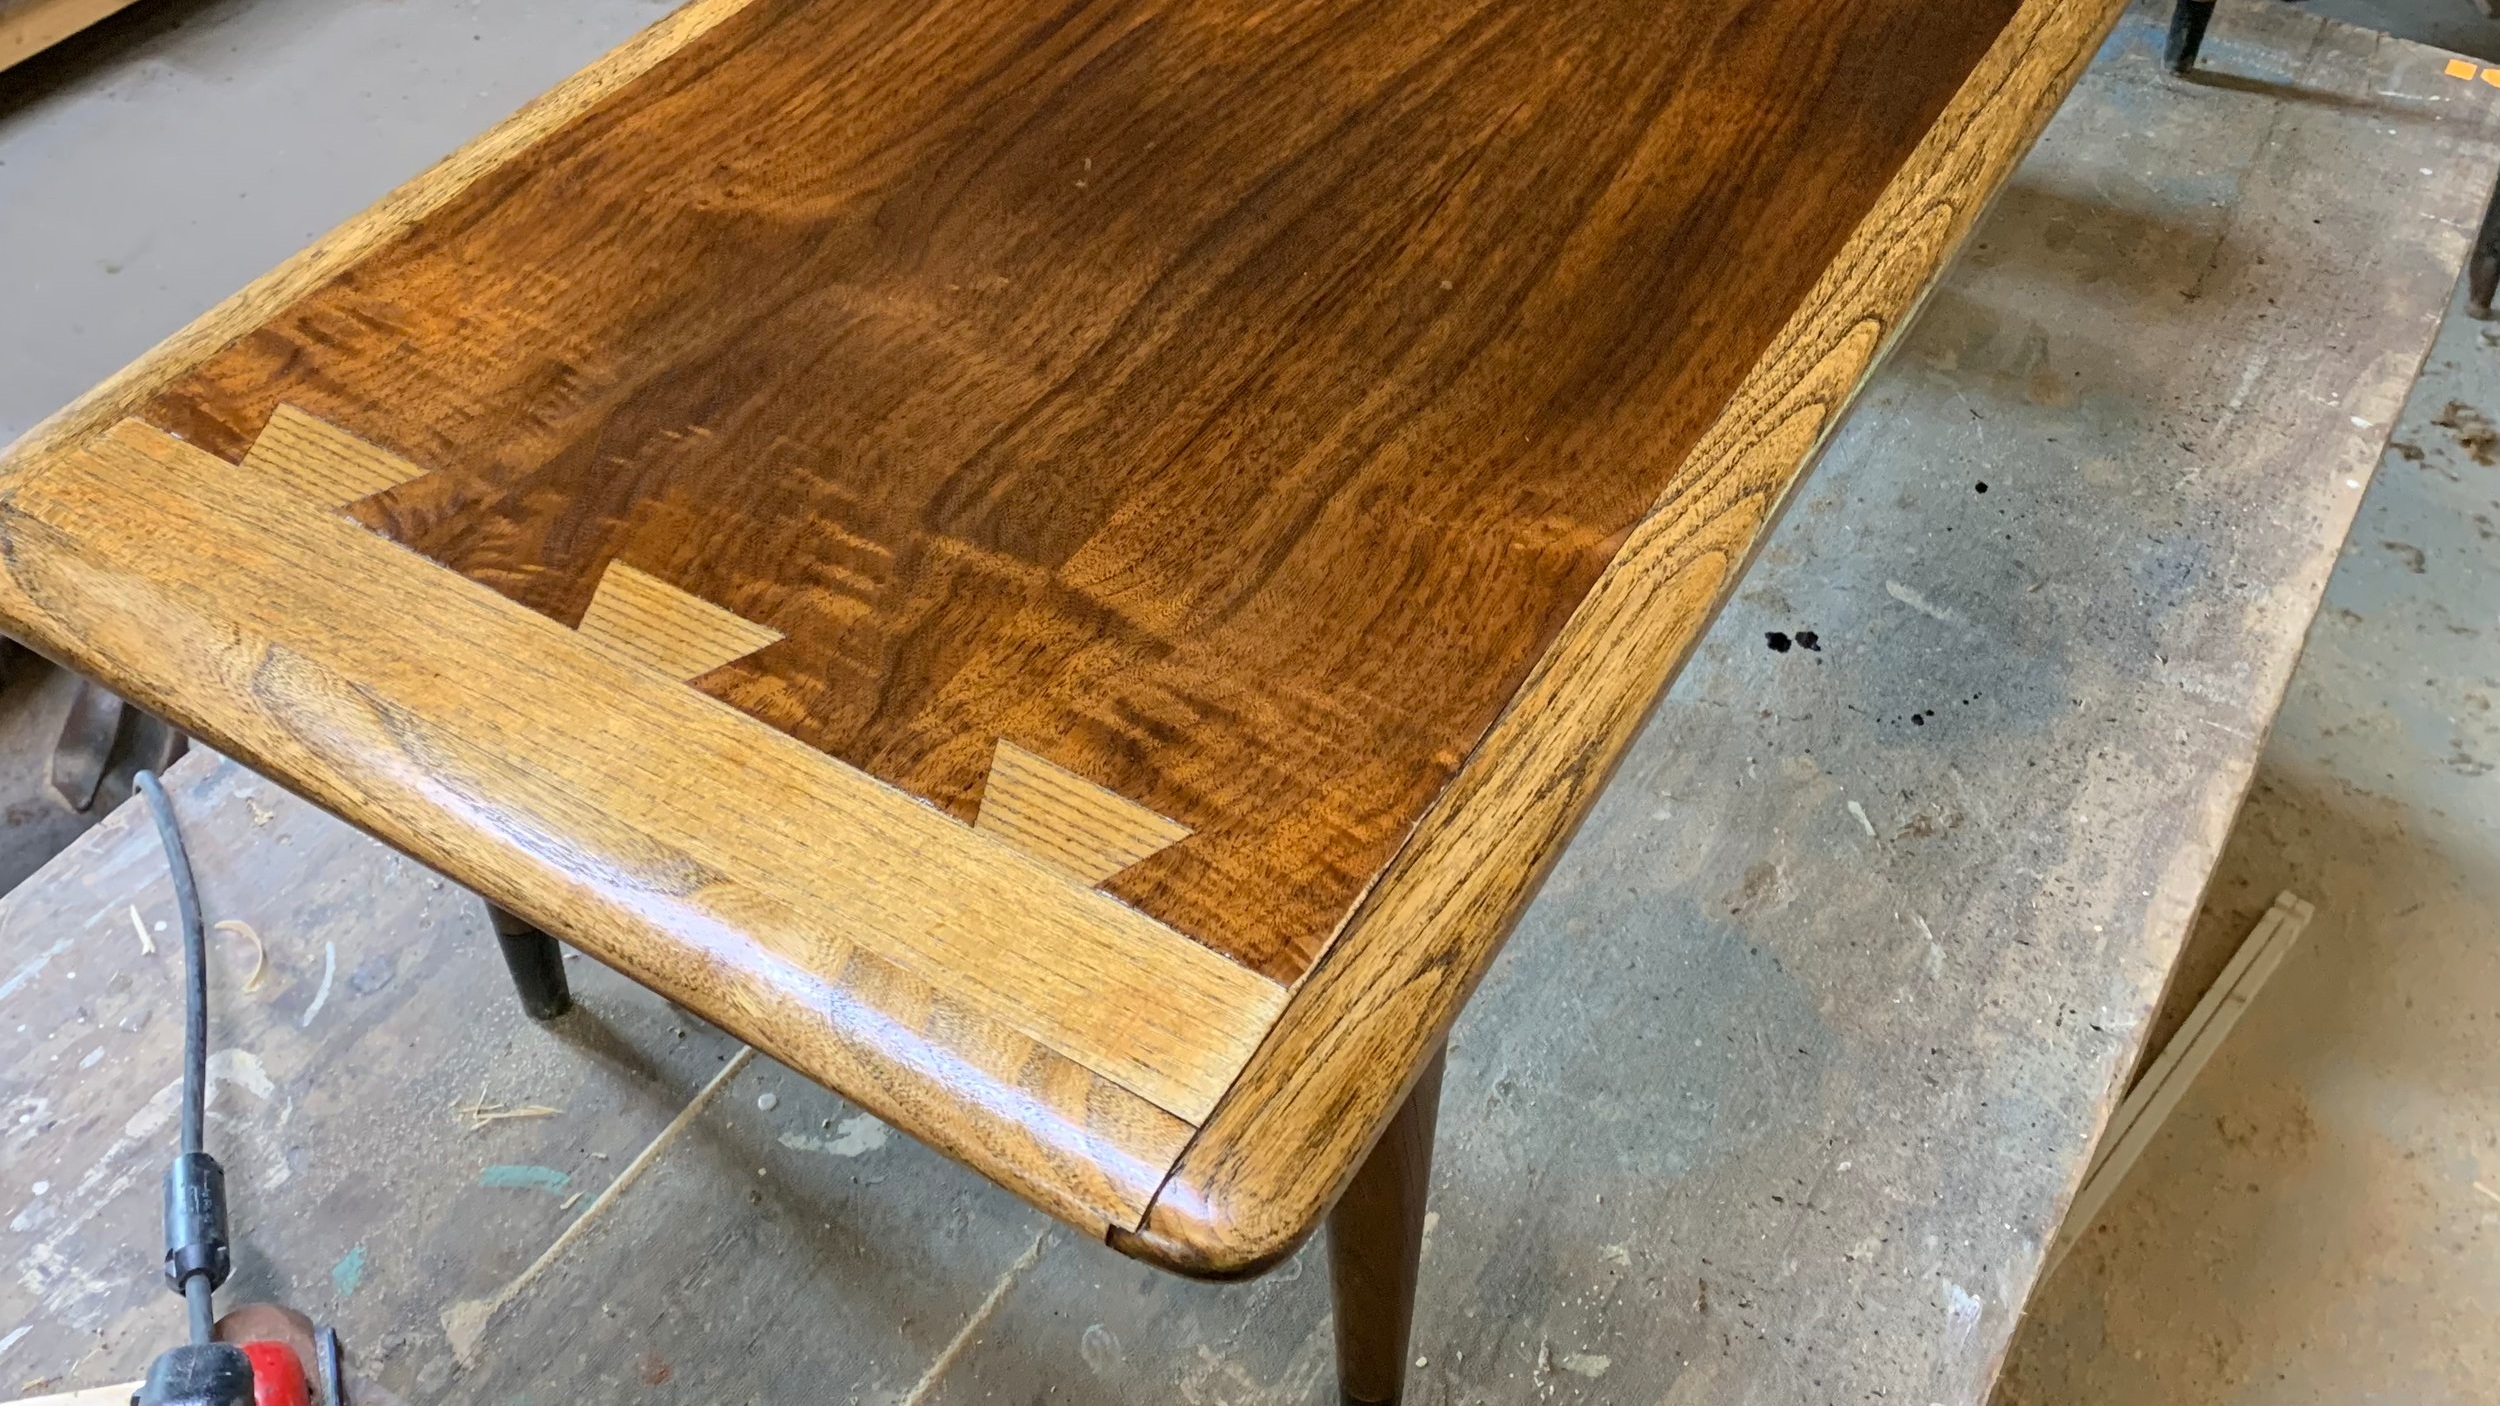 Refinishing a Coffee Table - The Craftsman Blog